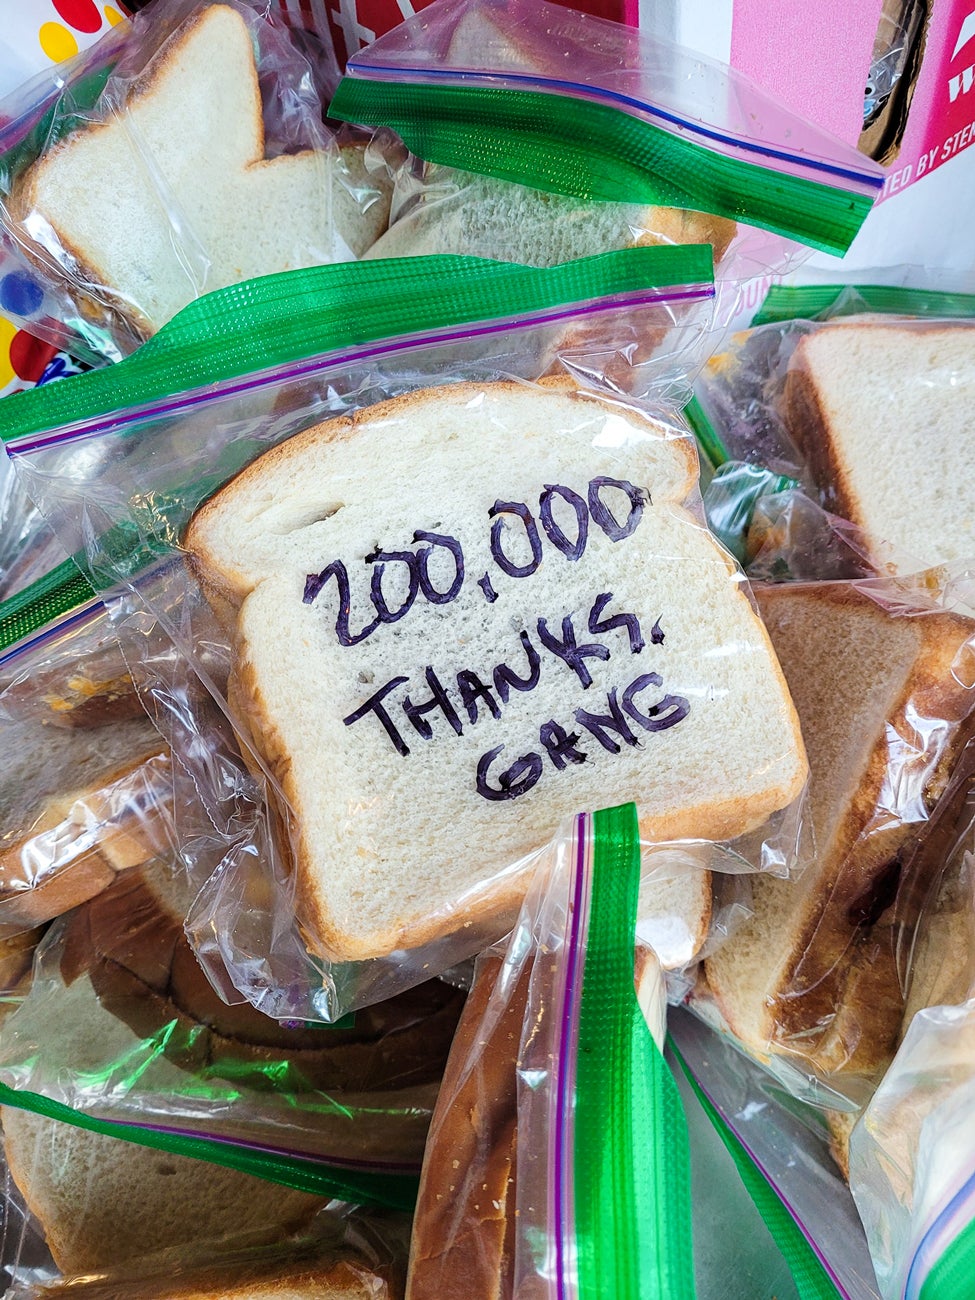 A pile of peanut butter and jelly sandwiches packed in zip lock bags. The top sandwich has "200,000 THANKS GUYS" written on the back.